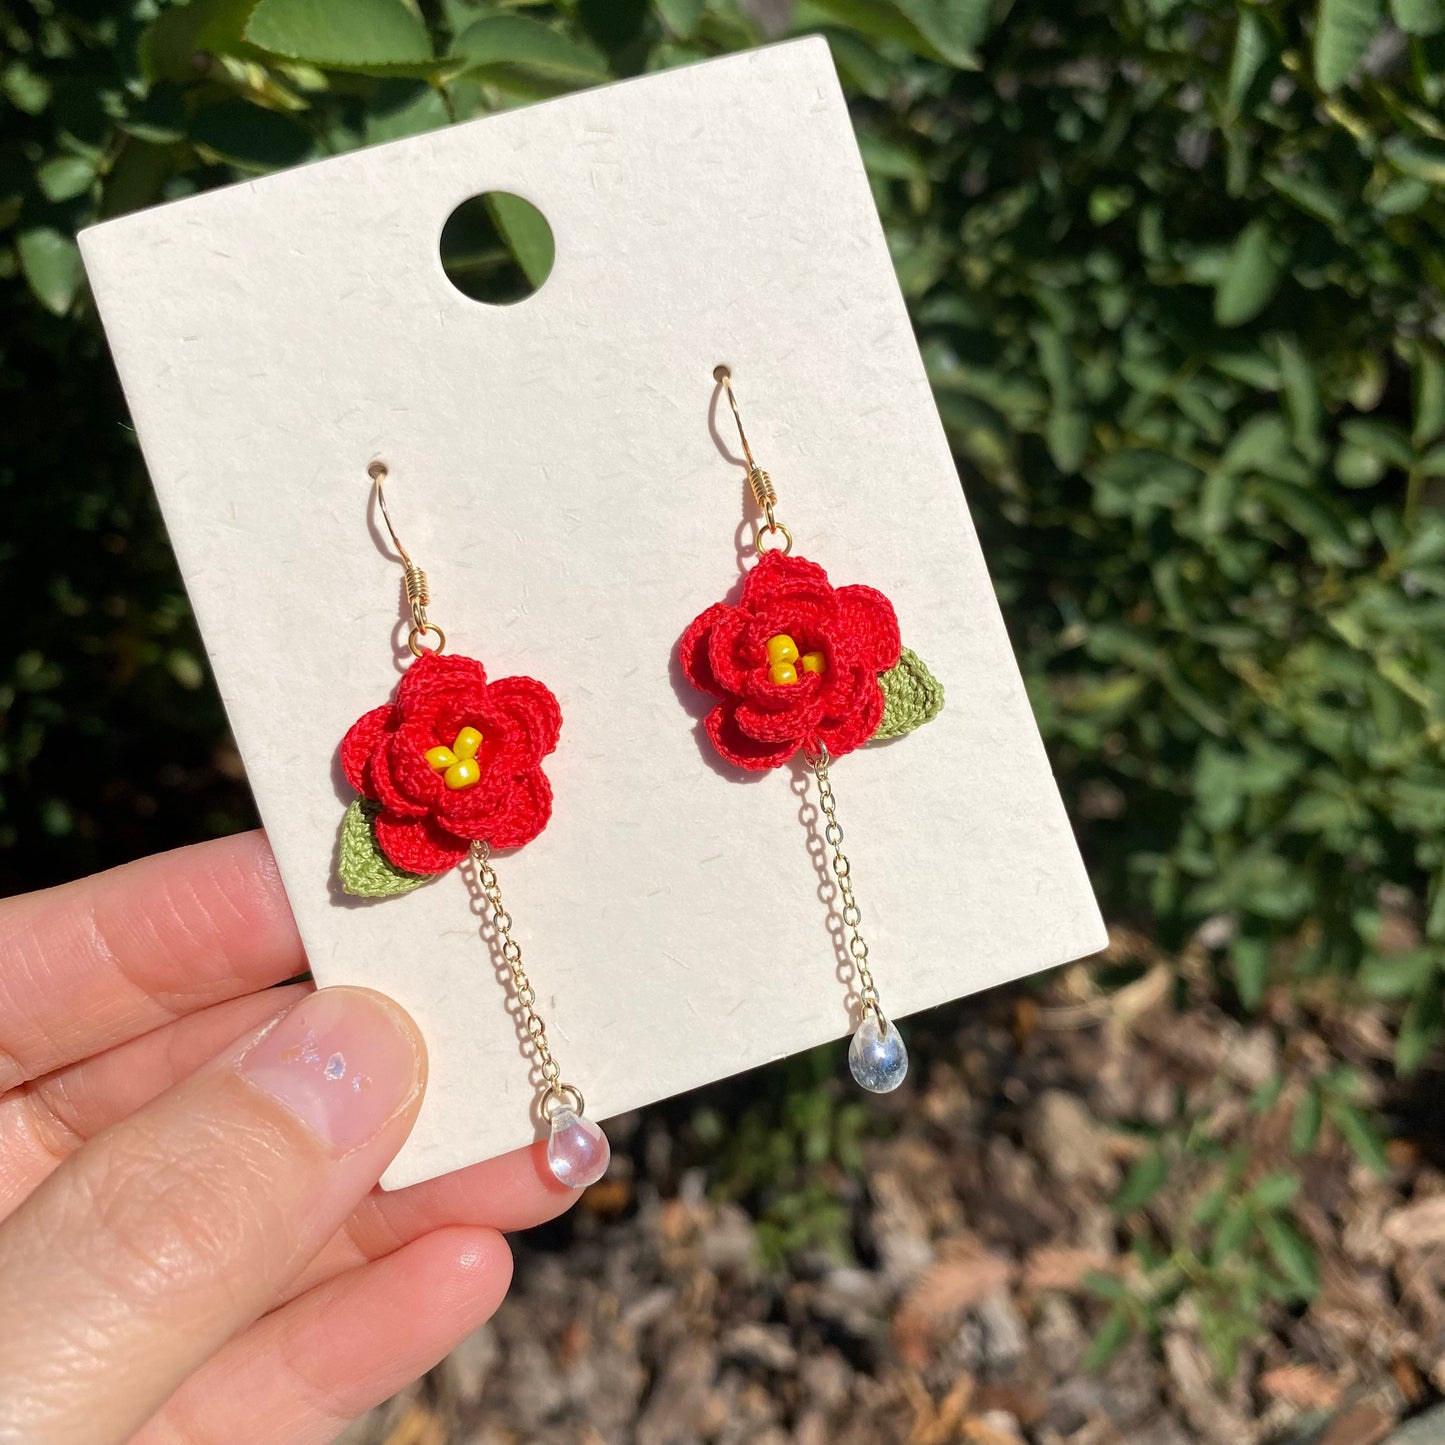 Load image into Gallery viewer, Red camellia flower crochet dangle earrings/Microcrochet/14k gold/gift for her/Knitting handmade jewelry
